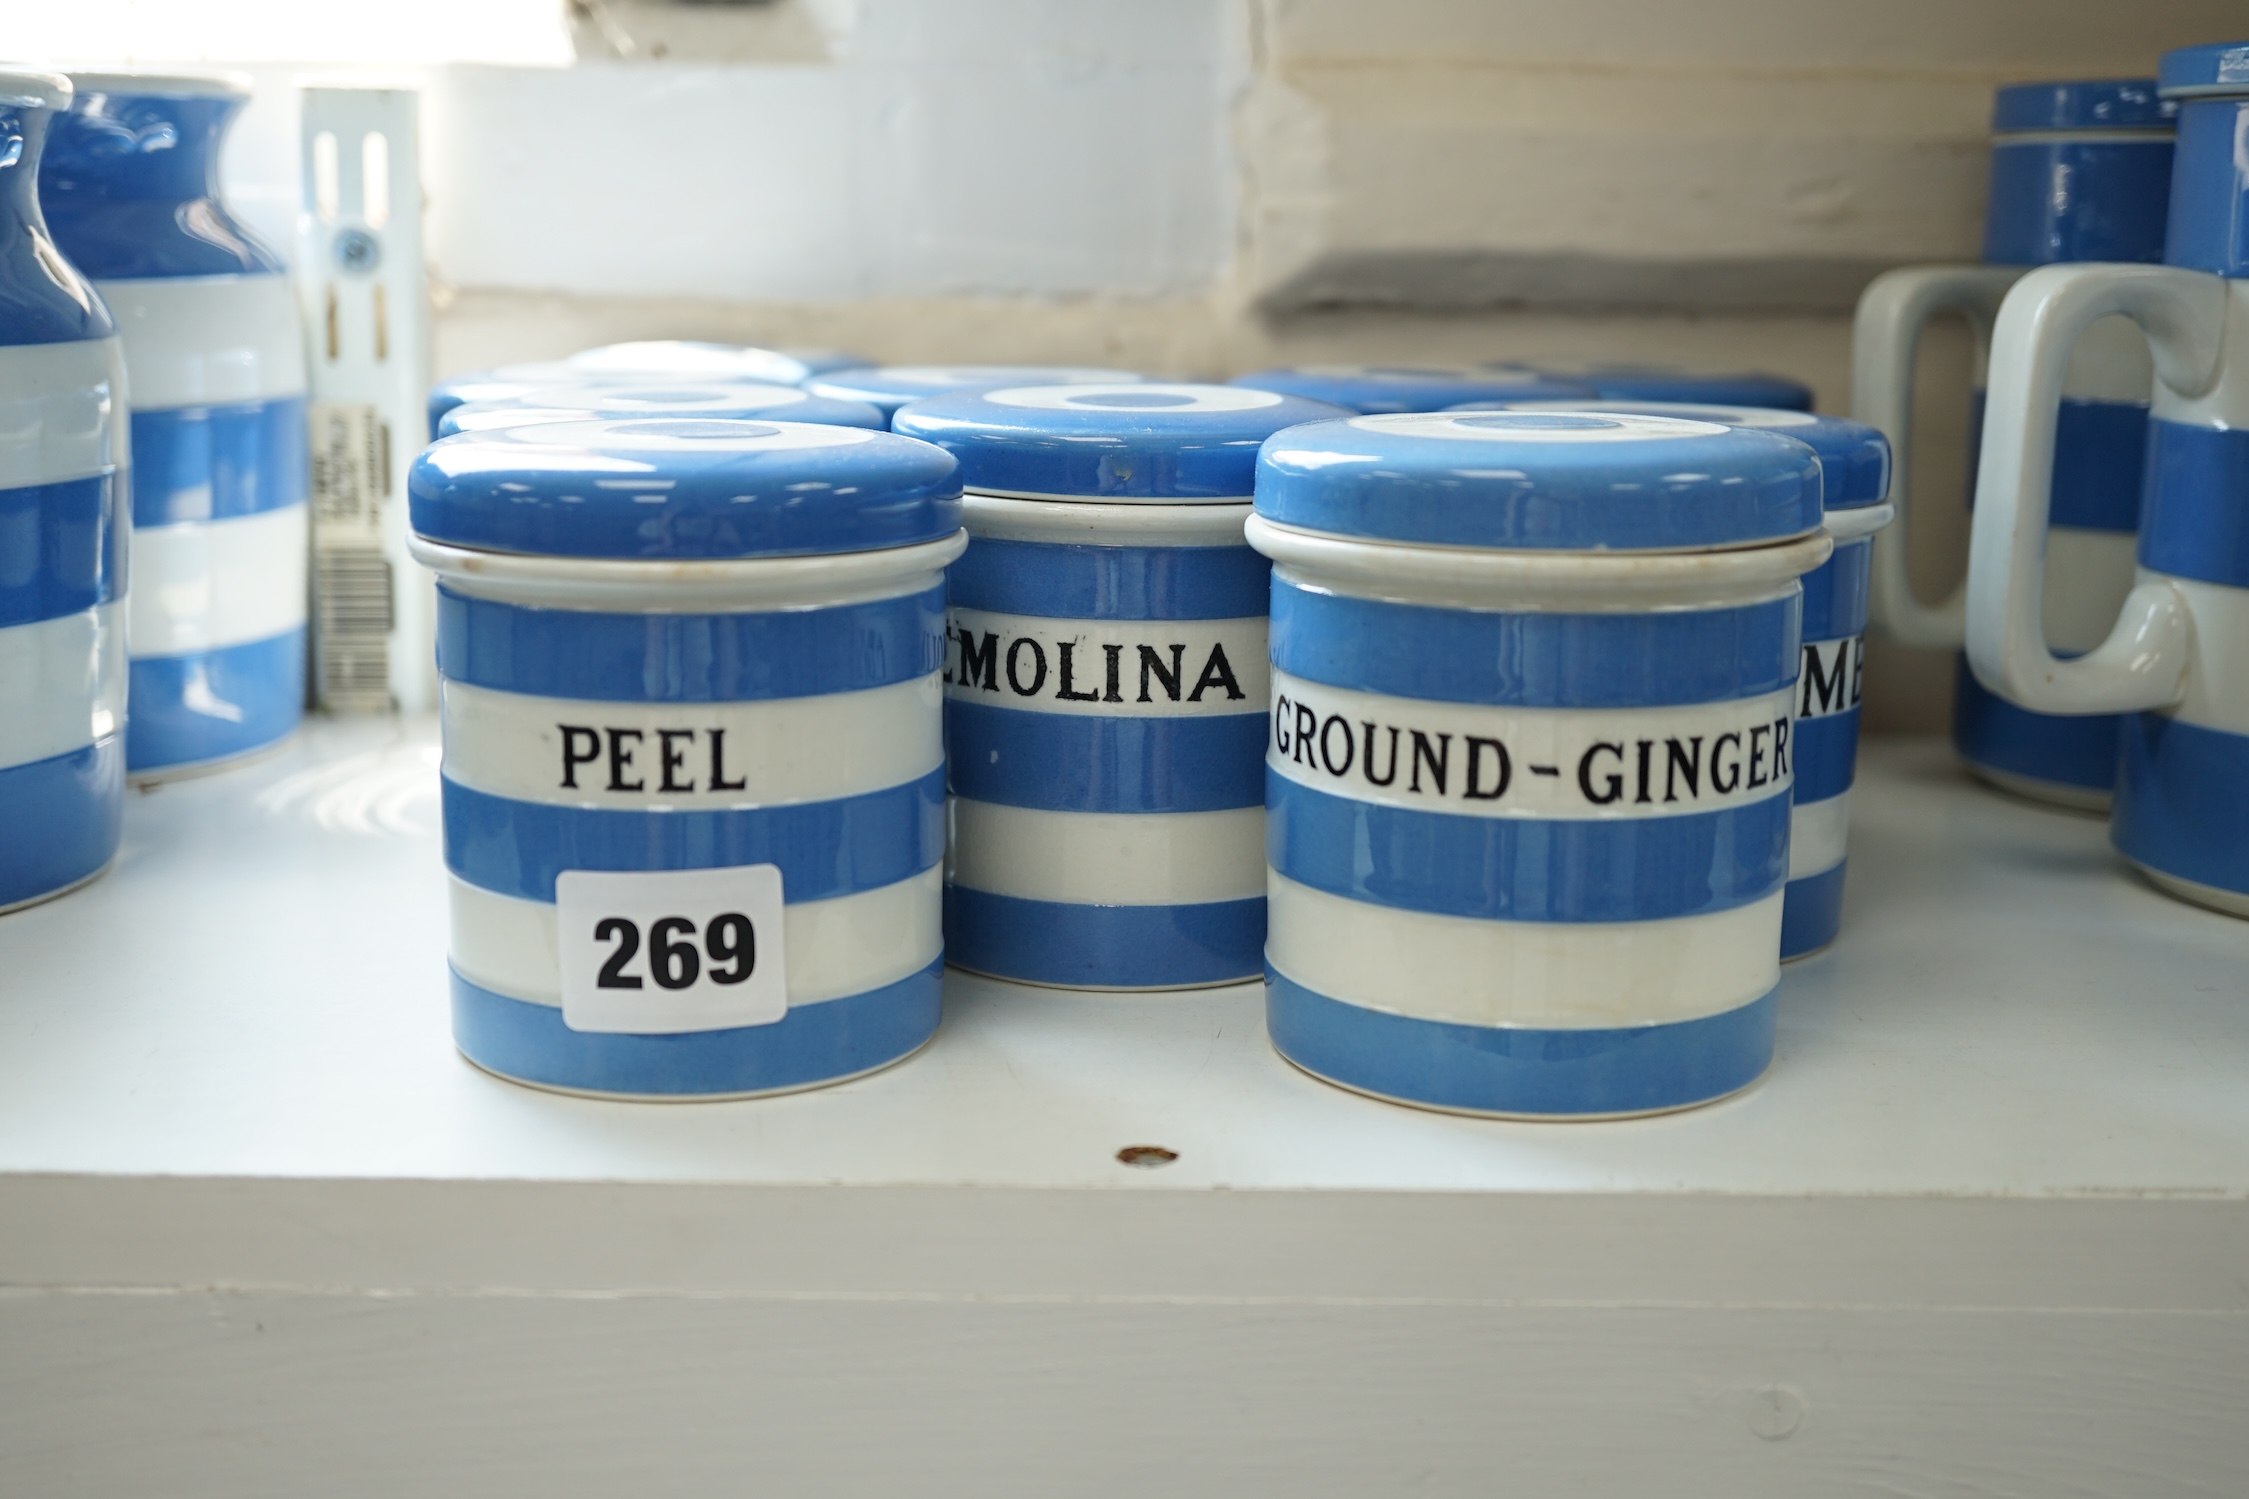 T.G.Green Cornish Kitchenware, eleven 9cm lidded storage jars to include Bi.Carb. Soda (2), Semolina, Ground-Ginger, Parsley, Pepper and Peel, Black Shield marks. Condition - fair to good